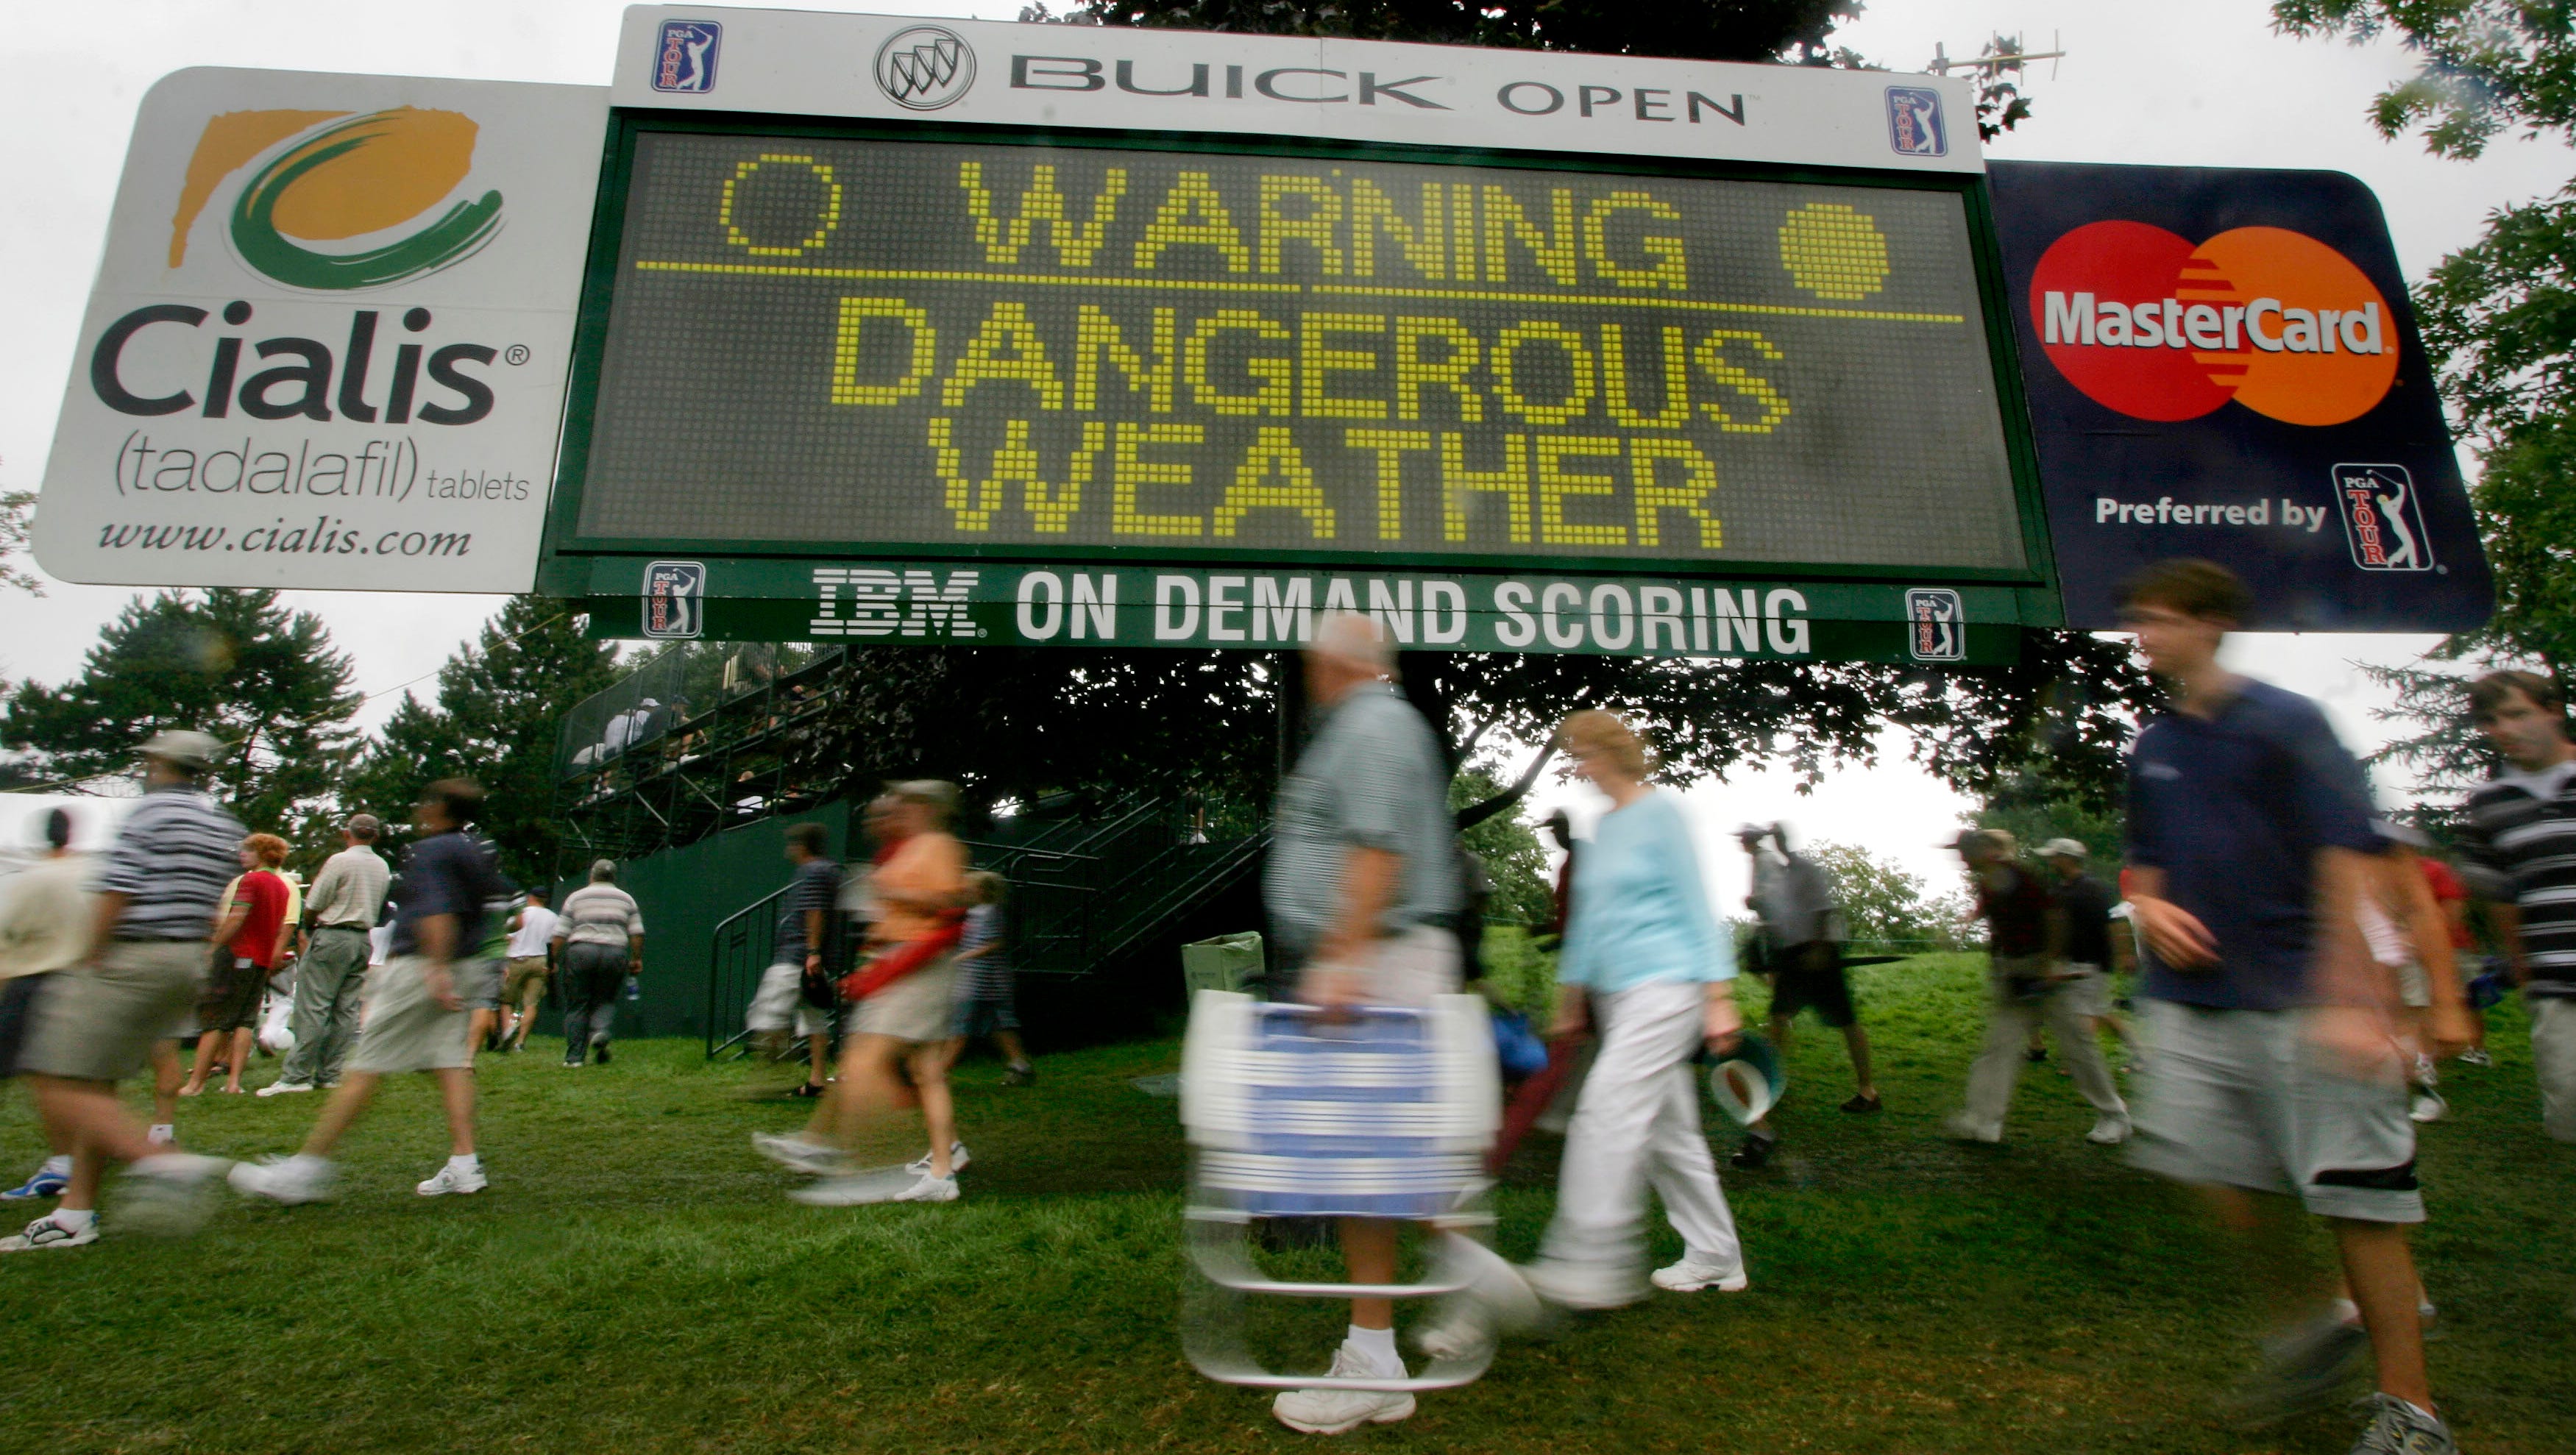 Golf fans evacuate Warwick Hill during a weather delay in 2006.